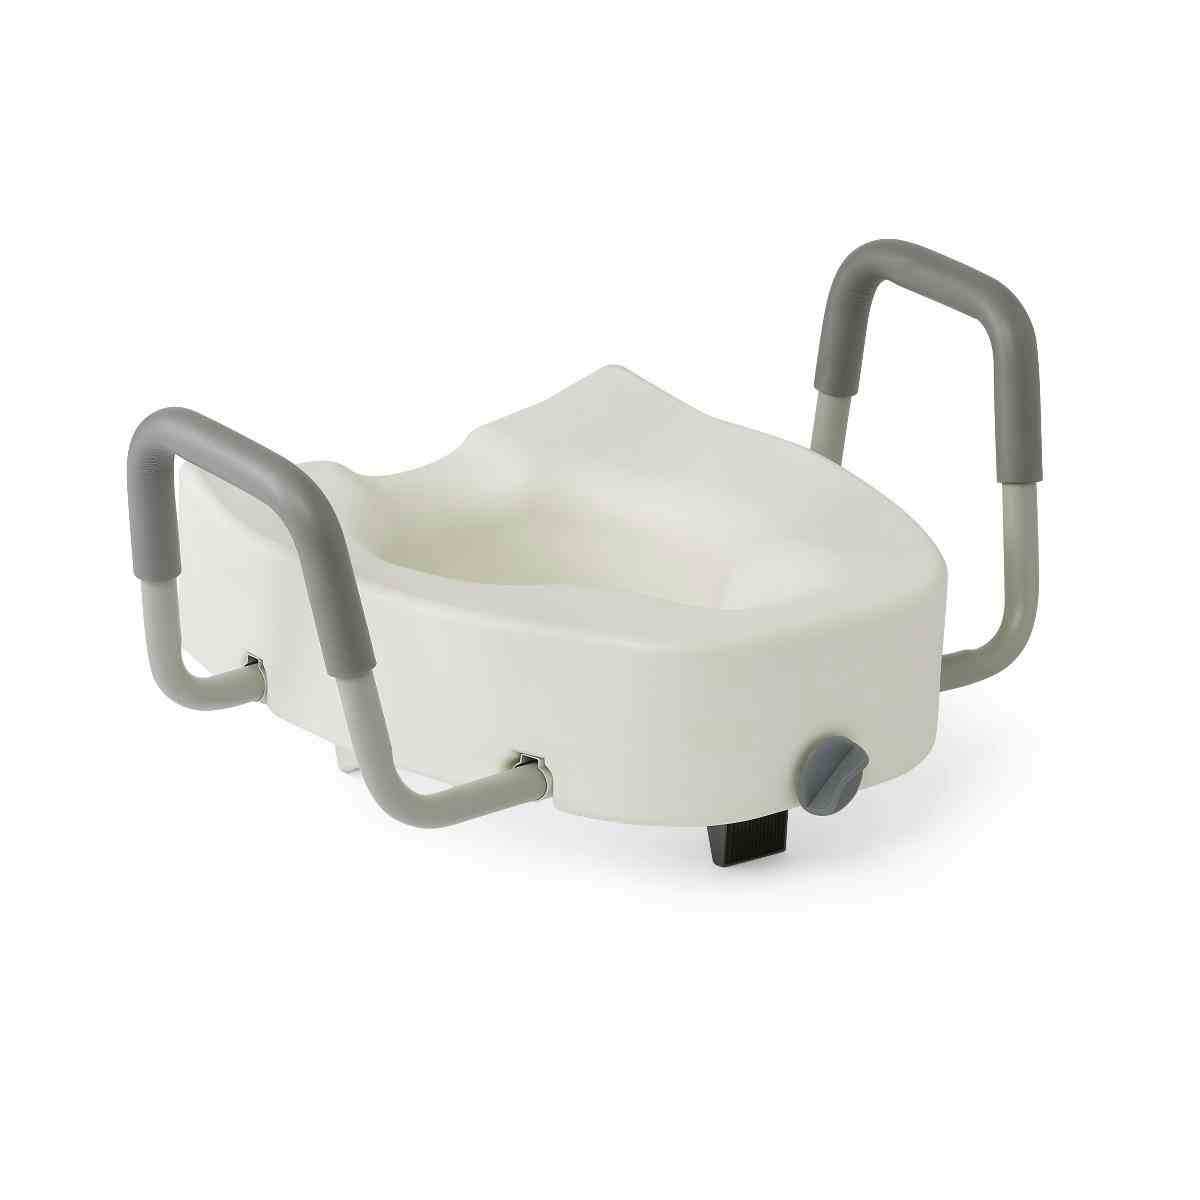 Medline Locking Raised Toilet Seats with Arms, G30270AH, 1 Each